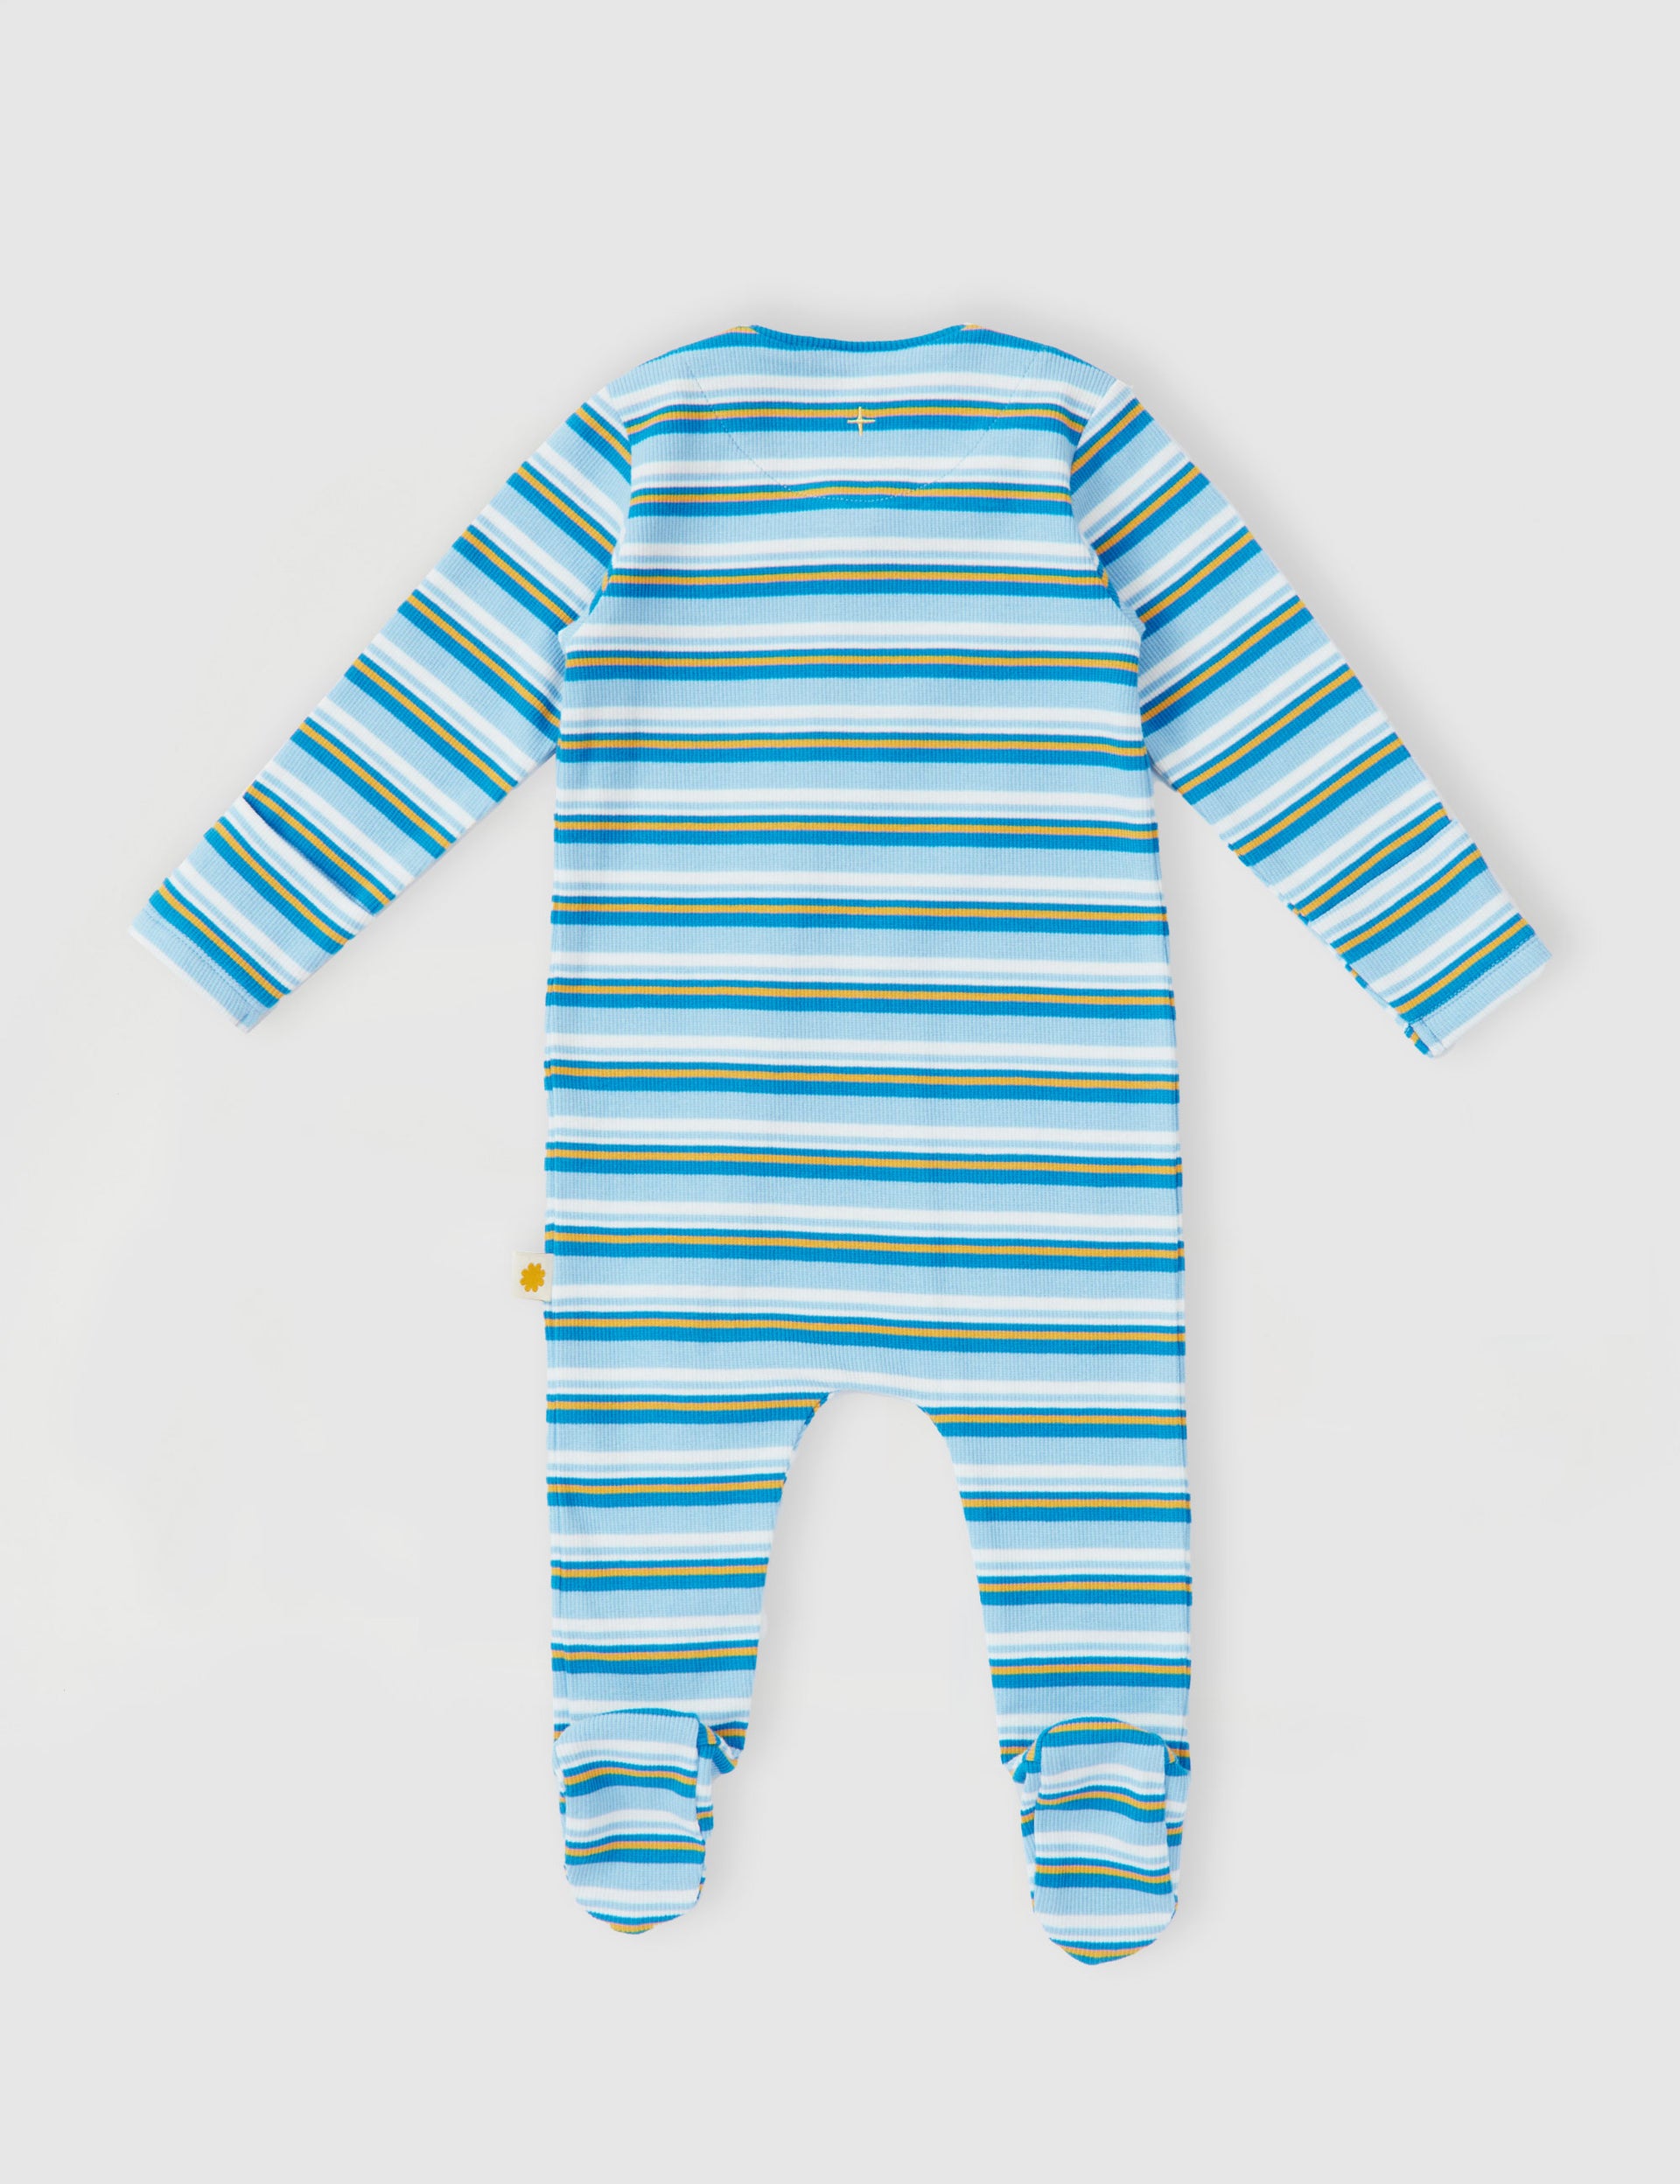 Sky Stripe Rib Footed Zipsuit